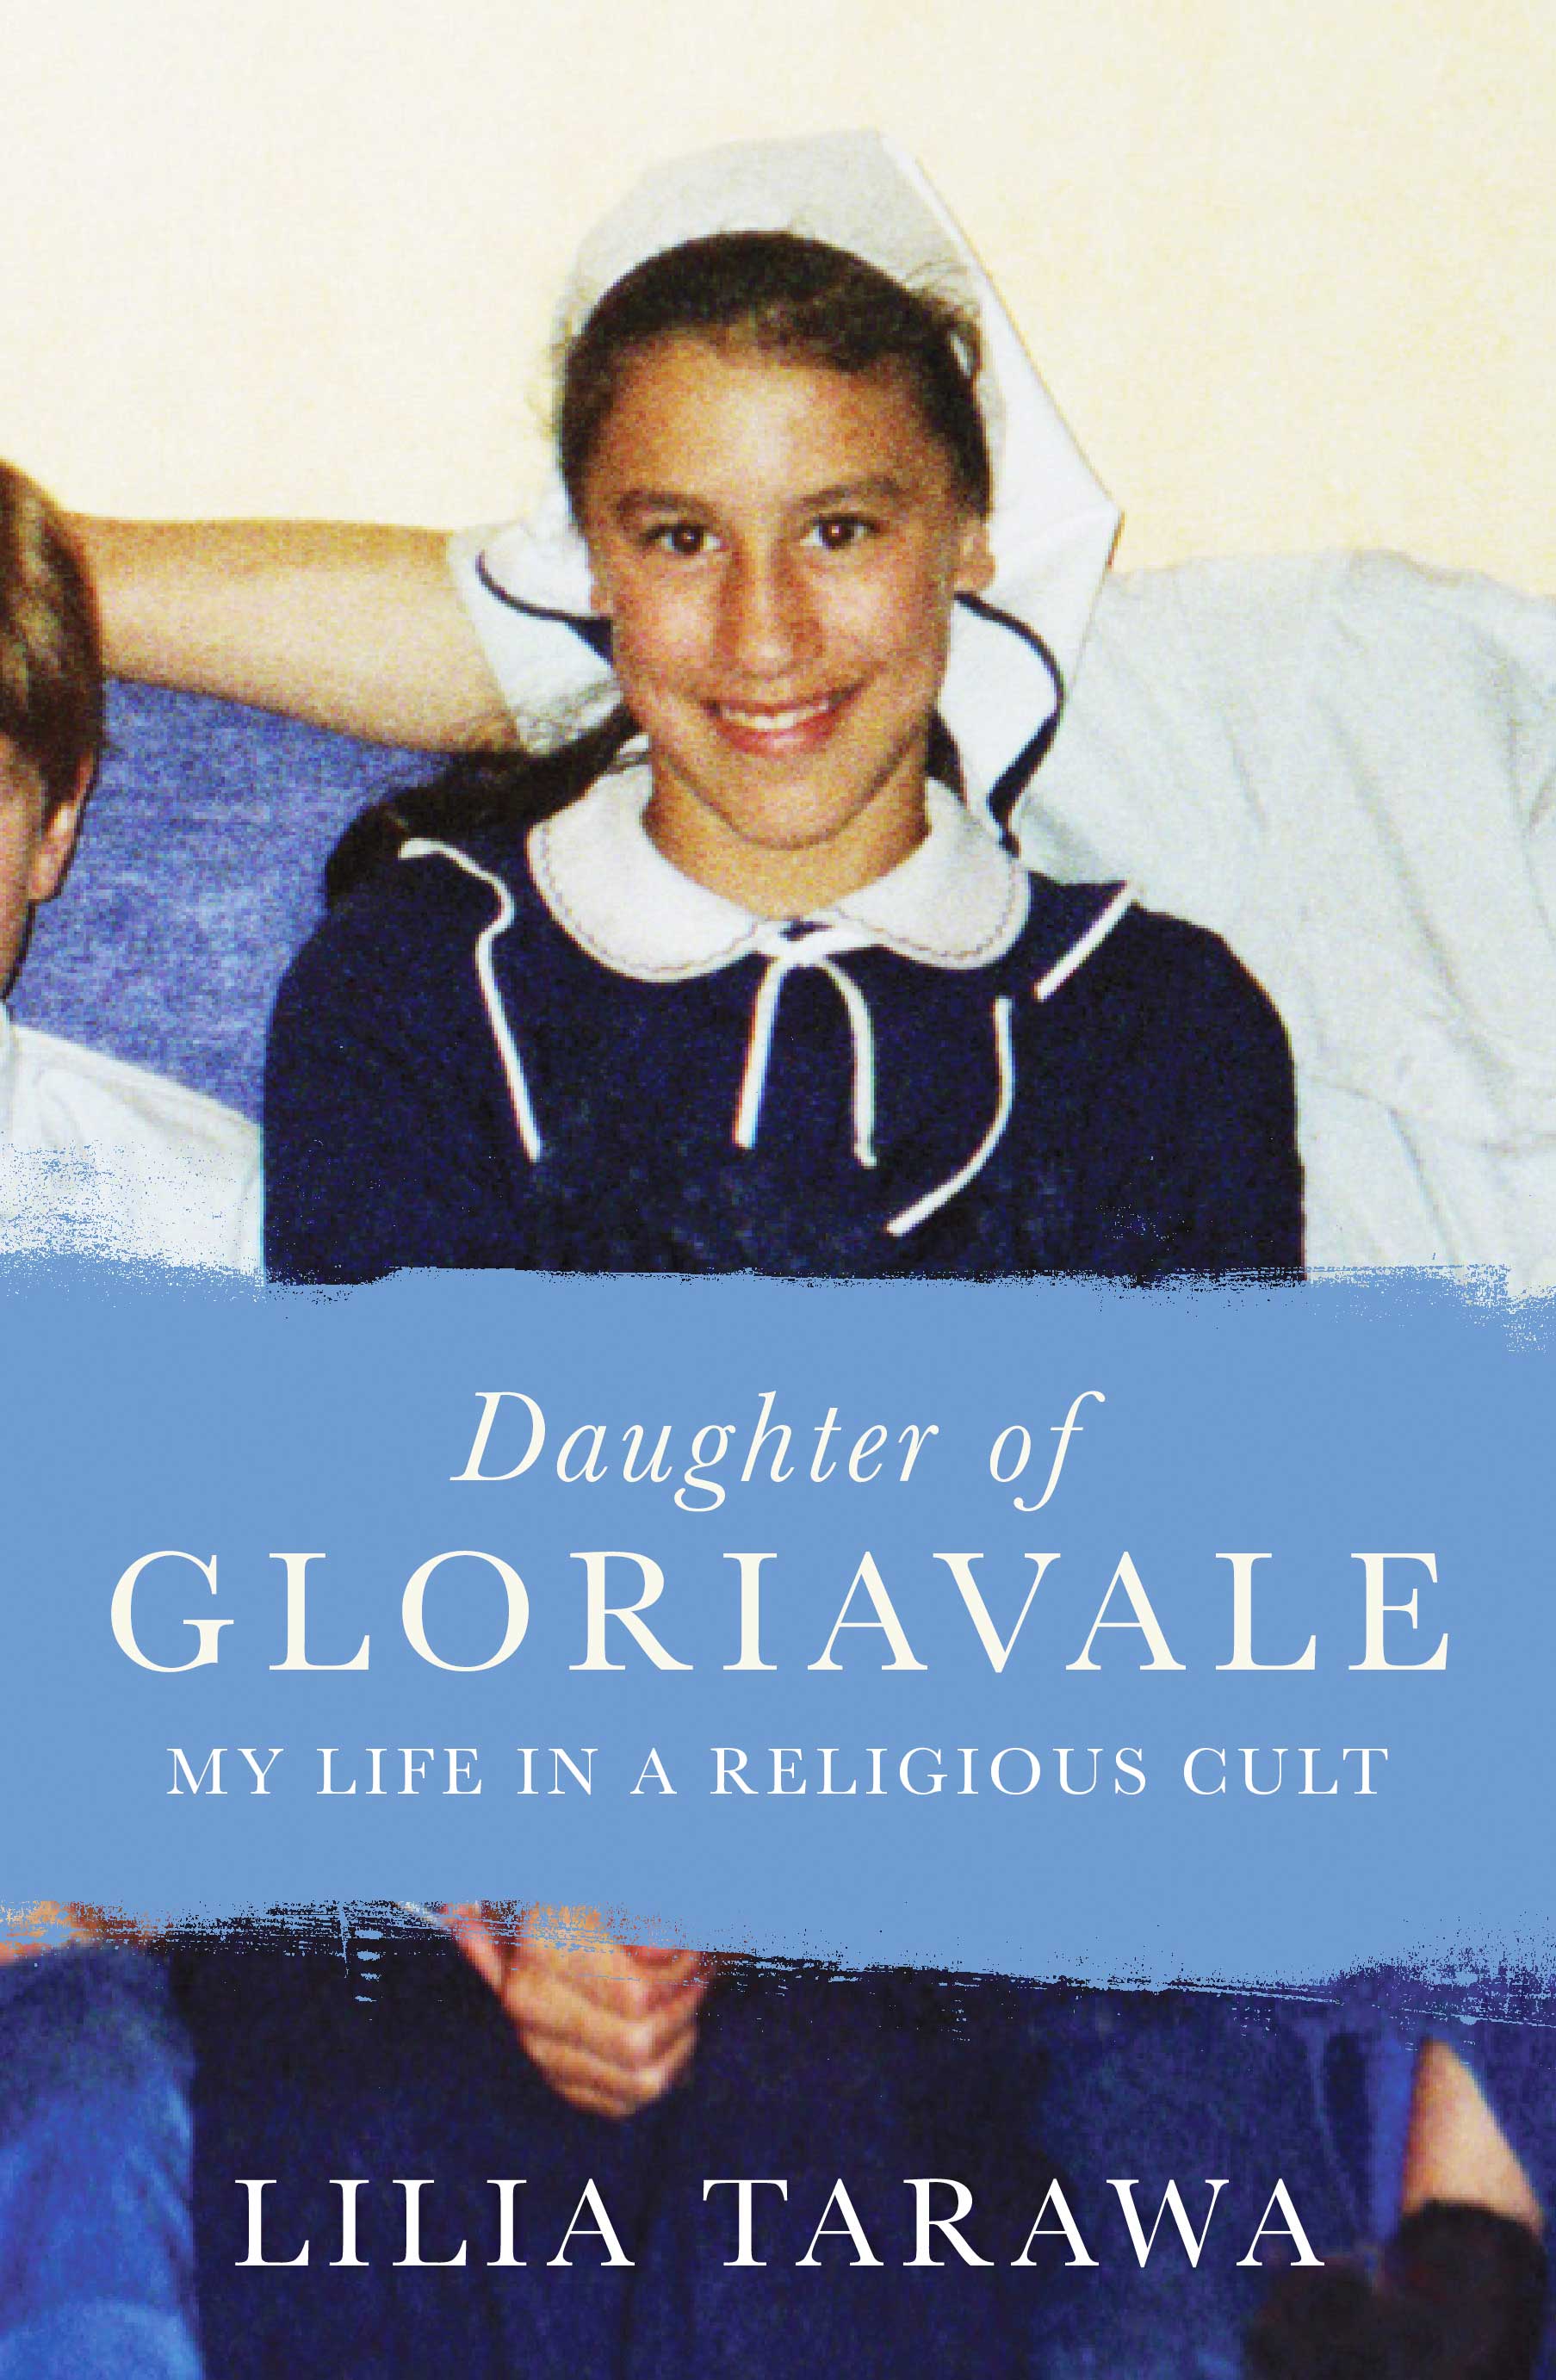 Daughter of Gloriavale: My life in a Religious Cult downloads torrent